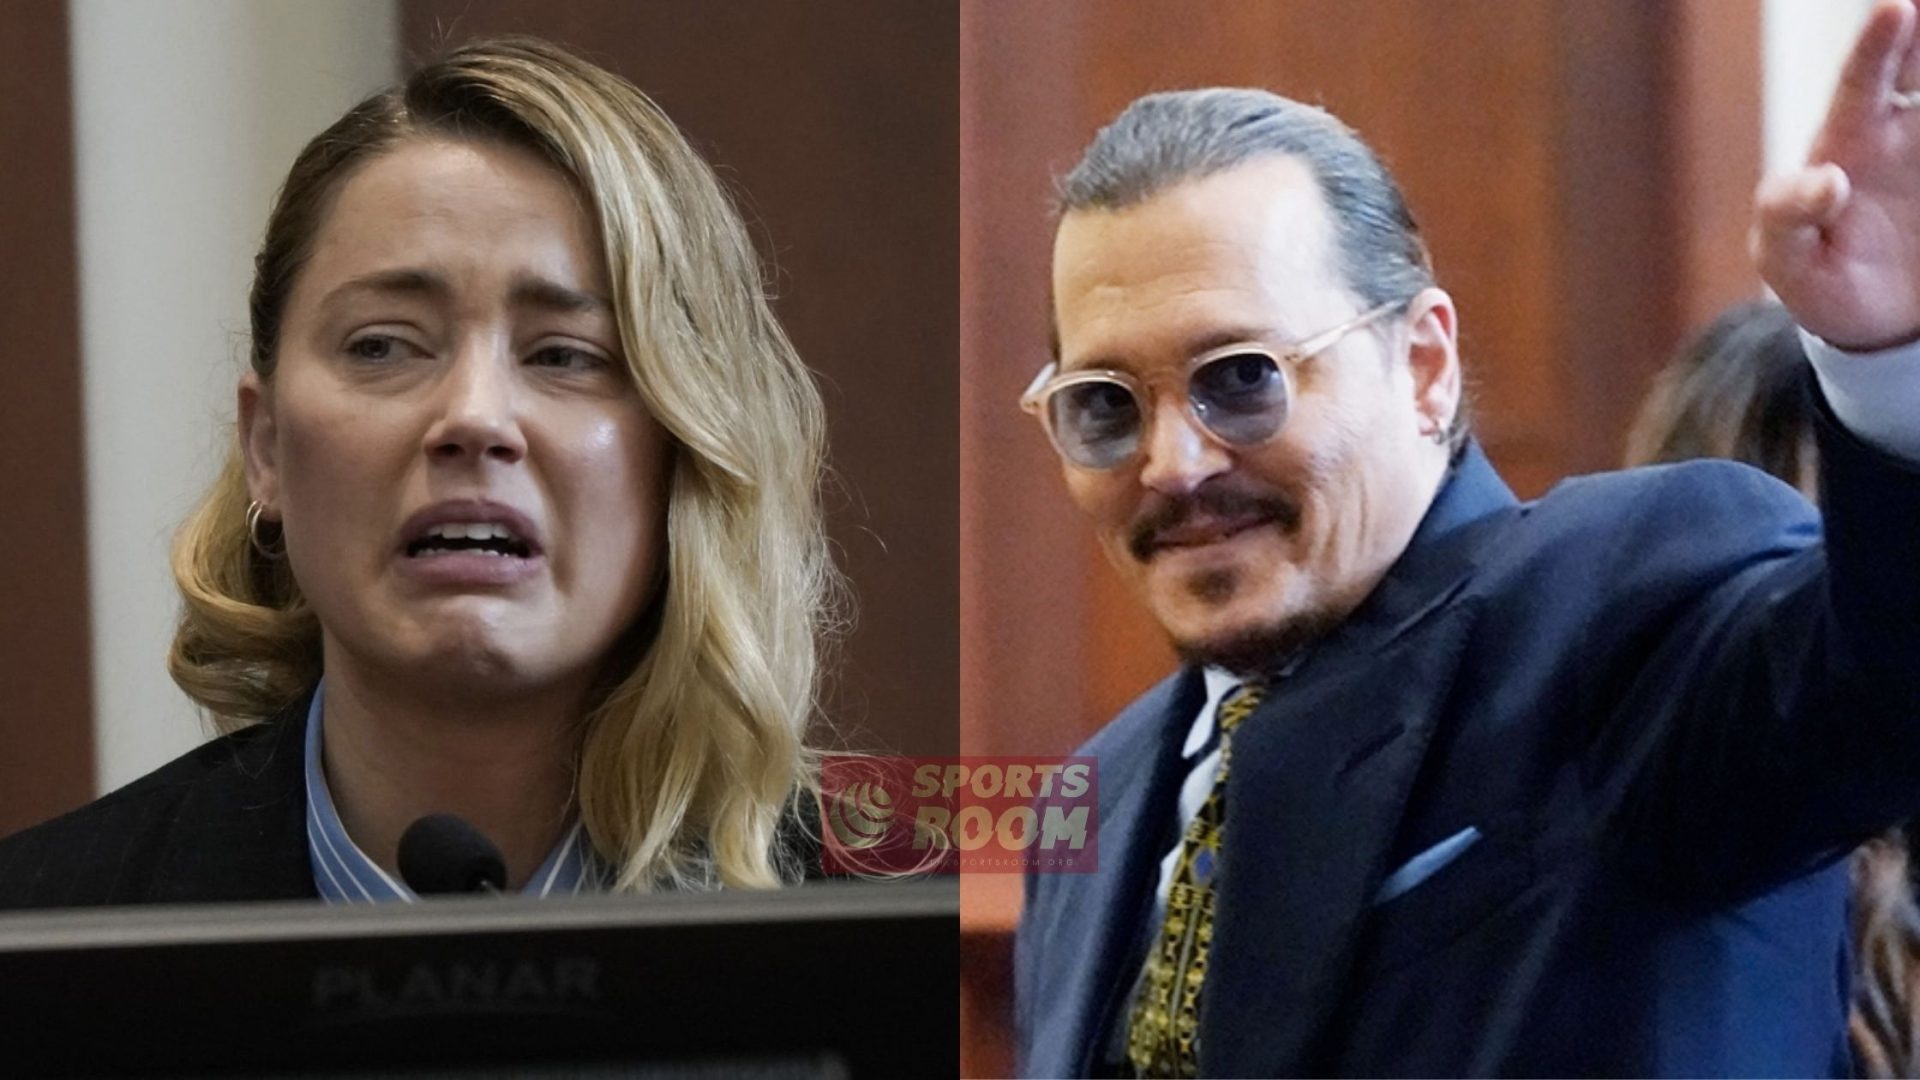 Johnny Deep Wins Defamation Trial, Amber Heard Disappointed